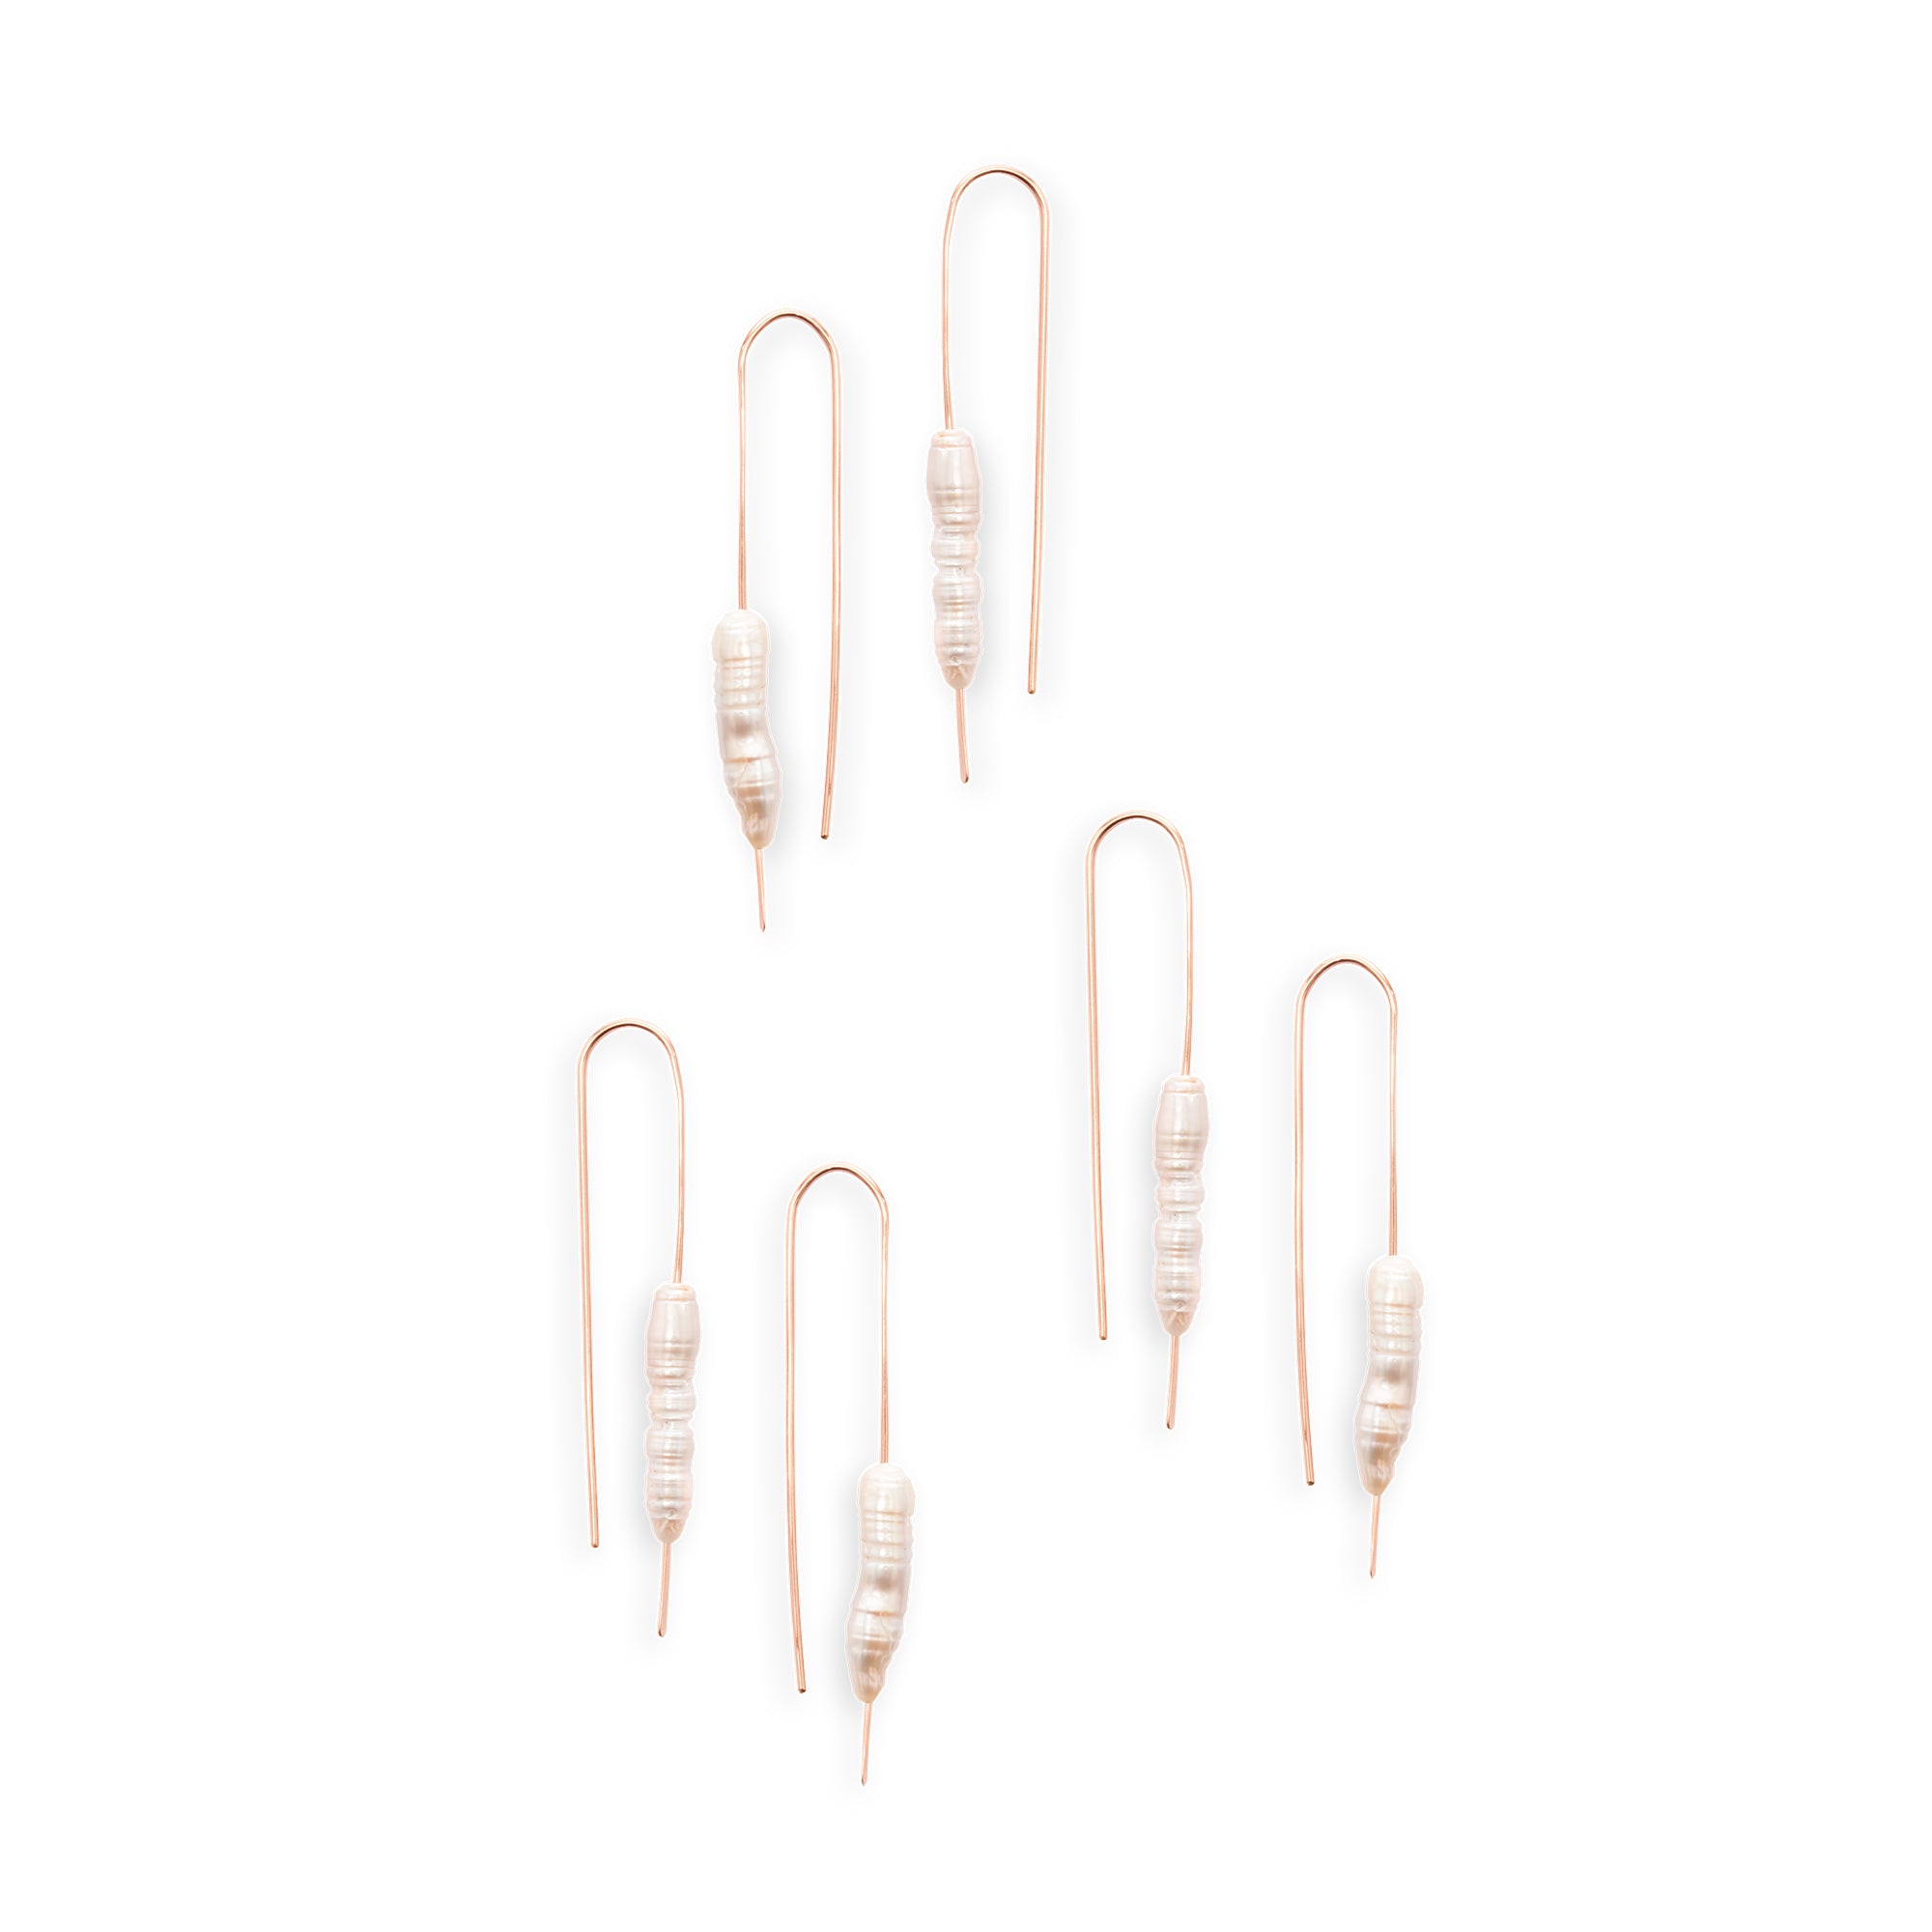 The Long Pearl Earrings feature a column of freshwater pearls that lend an organic element to an understated look